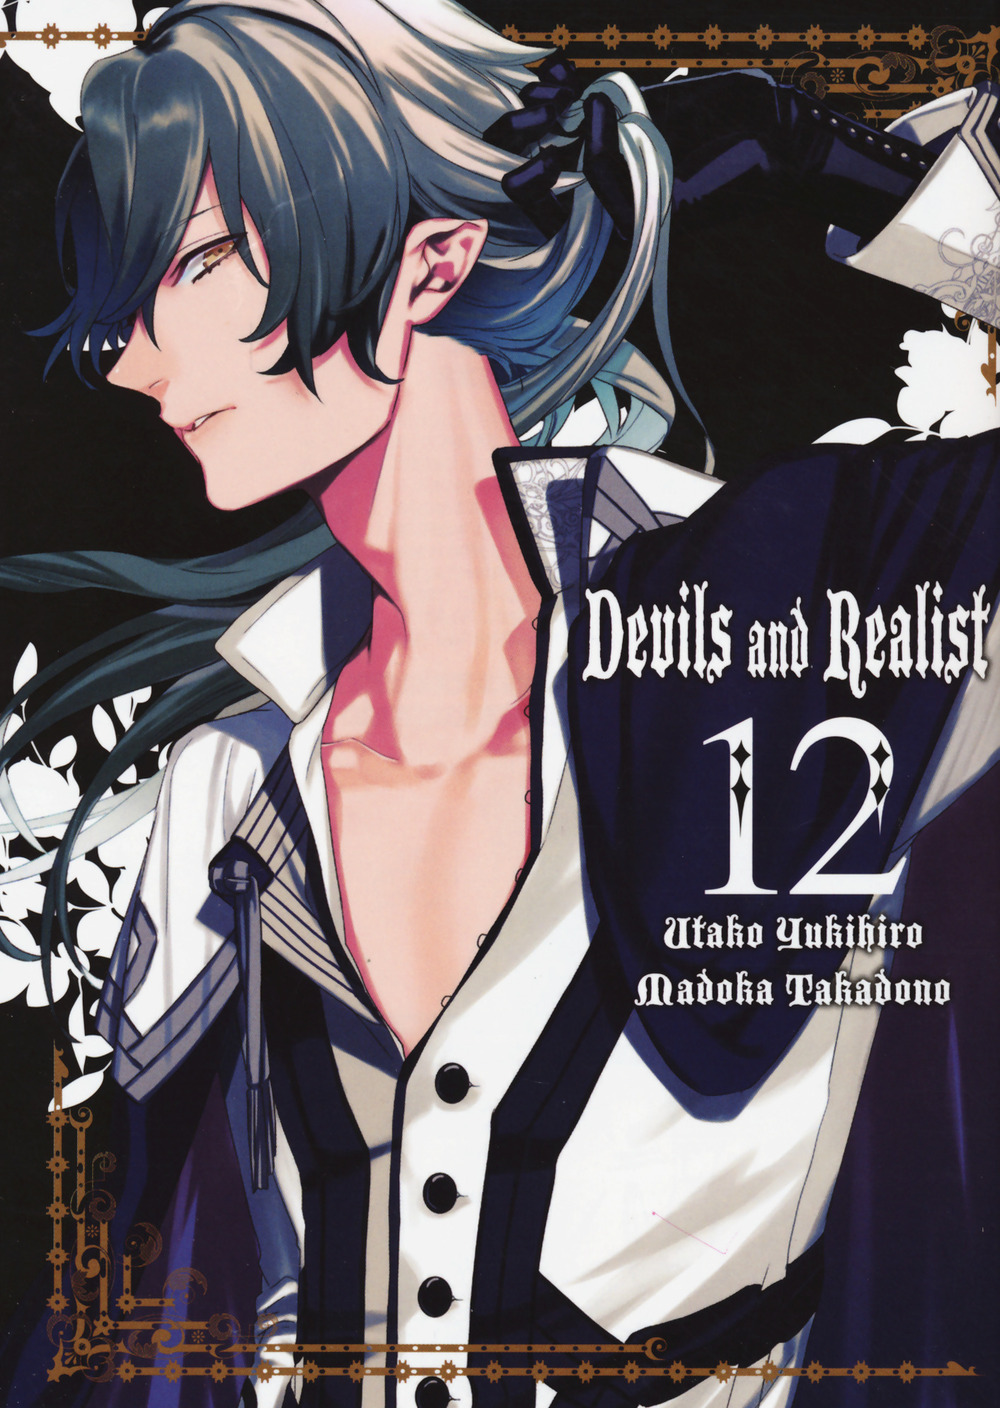 Devils and realist. Vol. 12